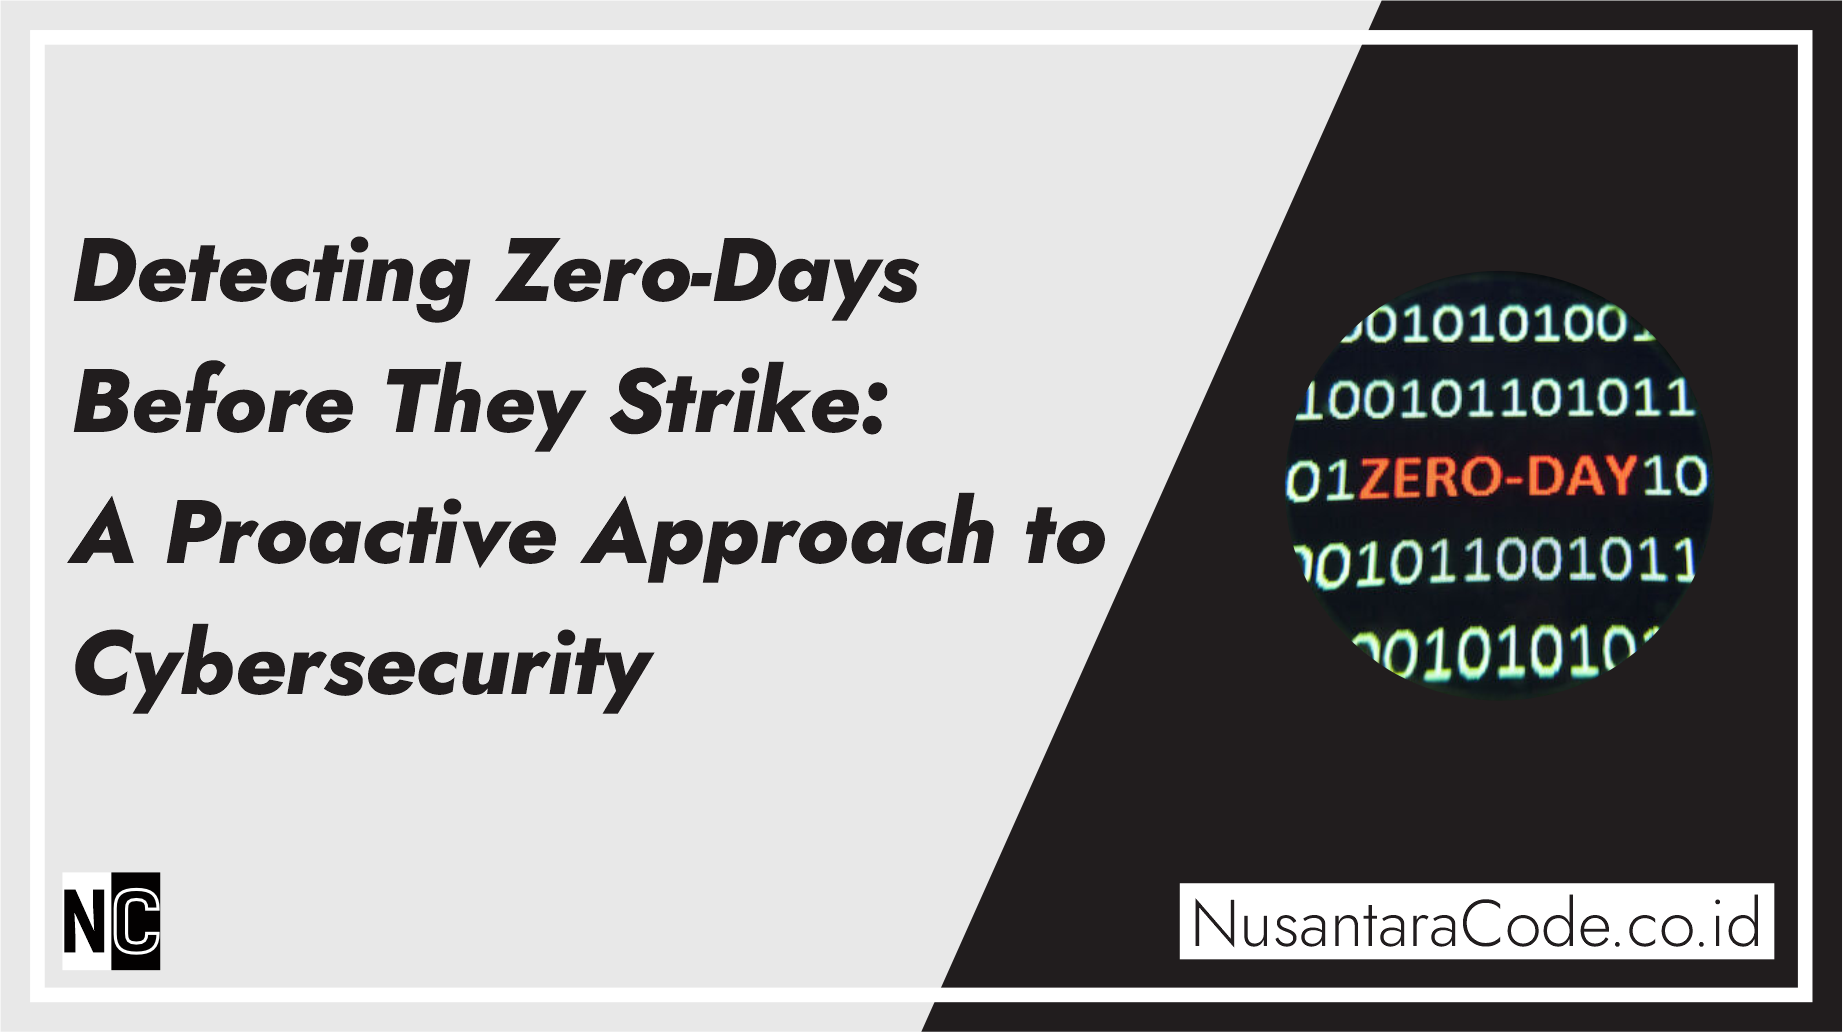 Detecting Zero-Days Before They Strike: A Proactive Approach to Cybersecurity